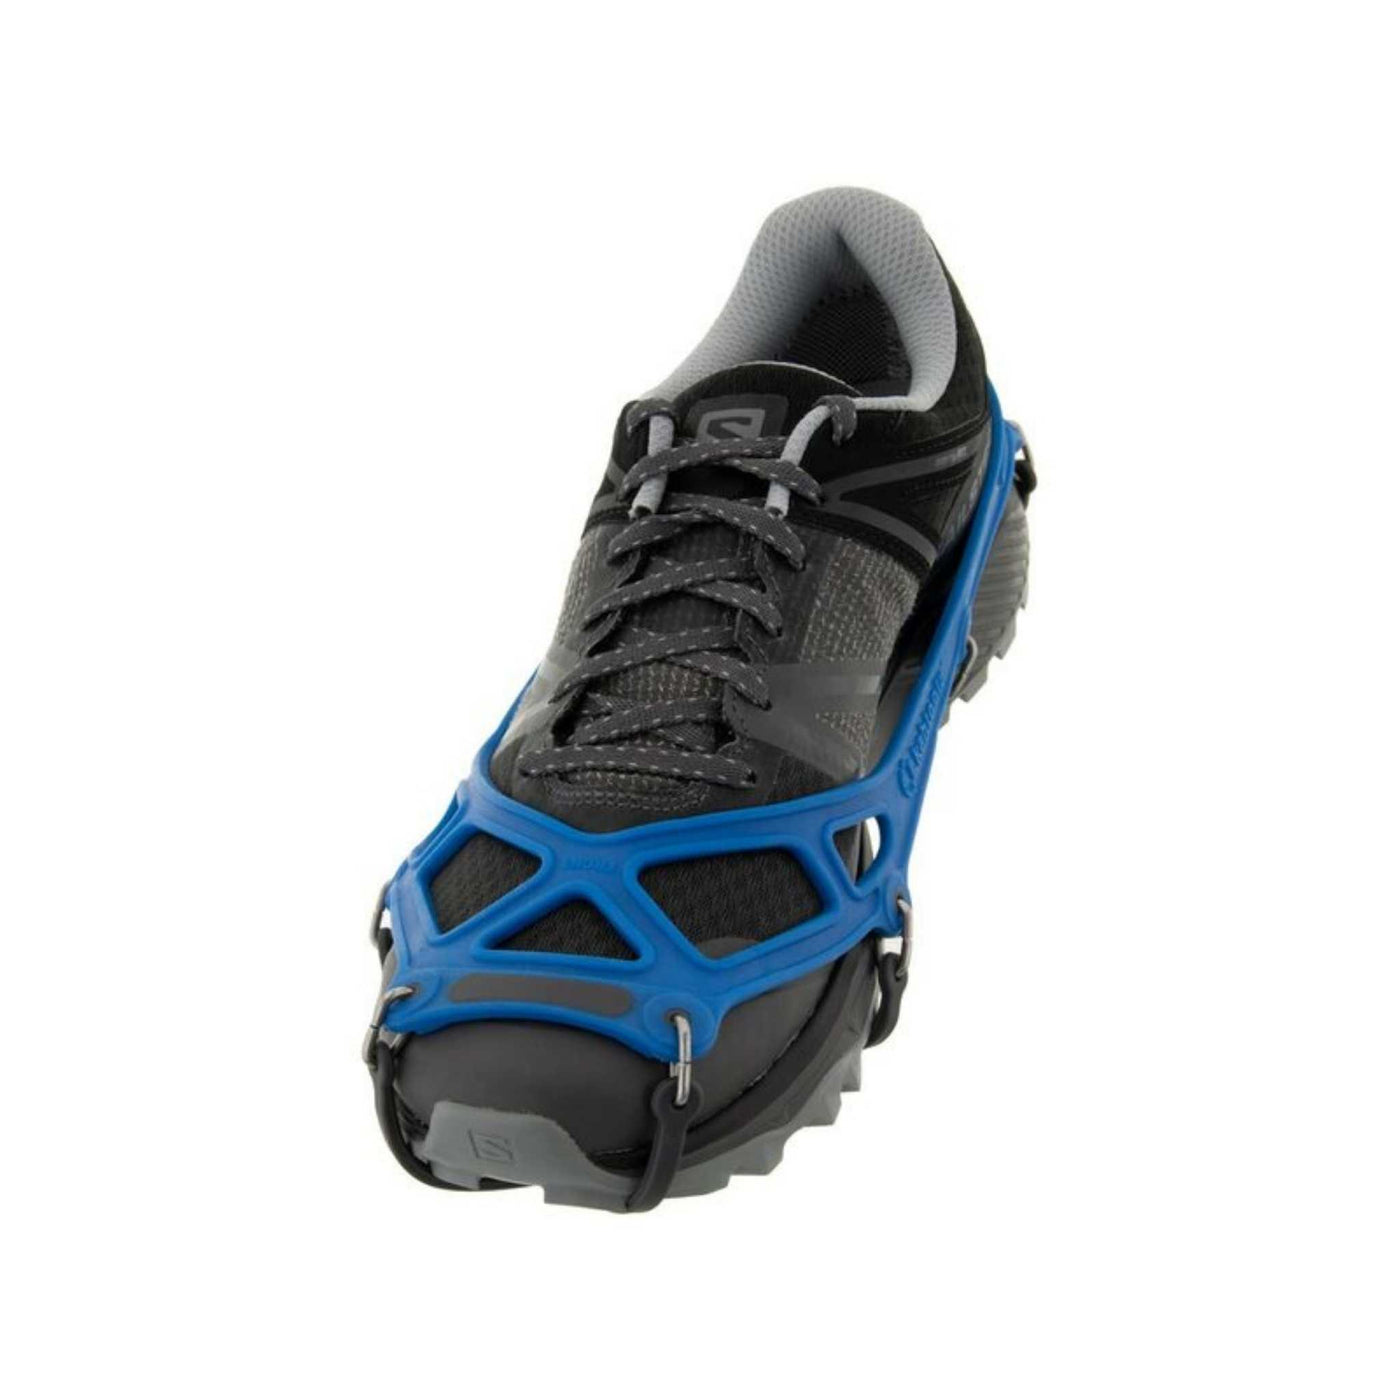 Kahtoola Exospikes | Running, Walking and Hiking Crampons | Further Faster Christchurch NZ #blue-exo